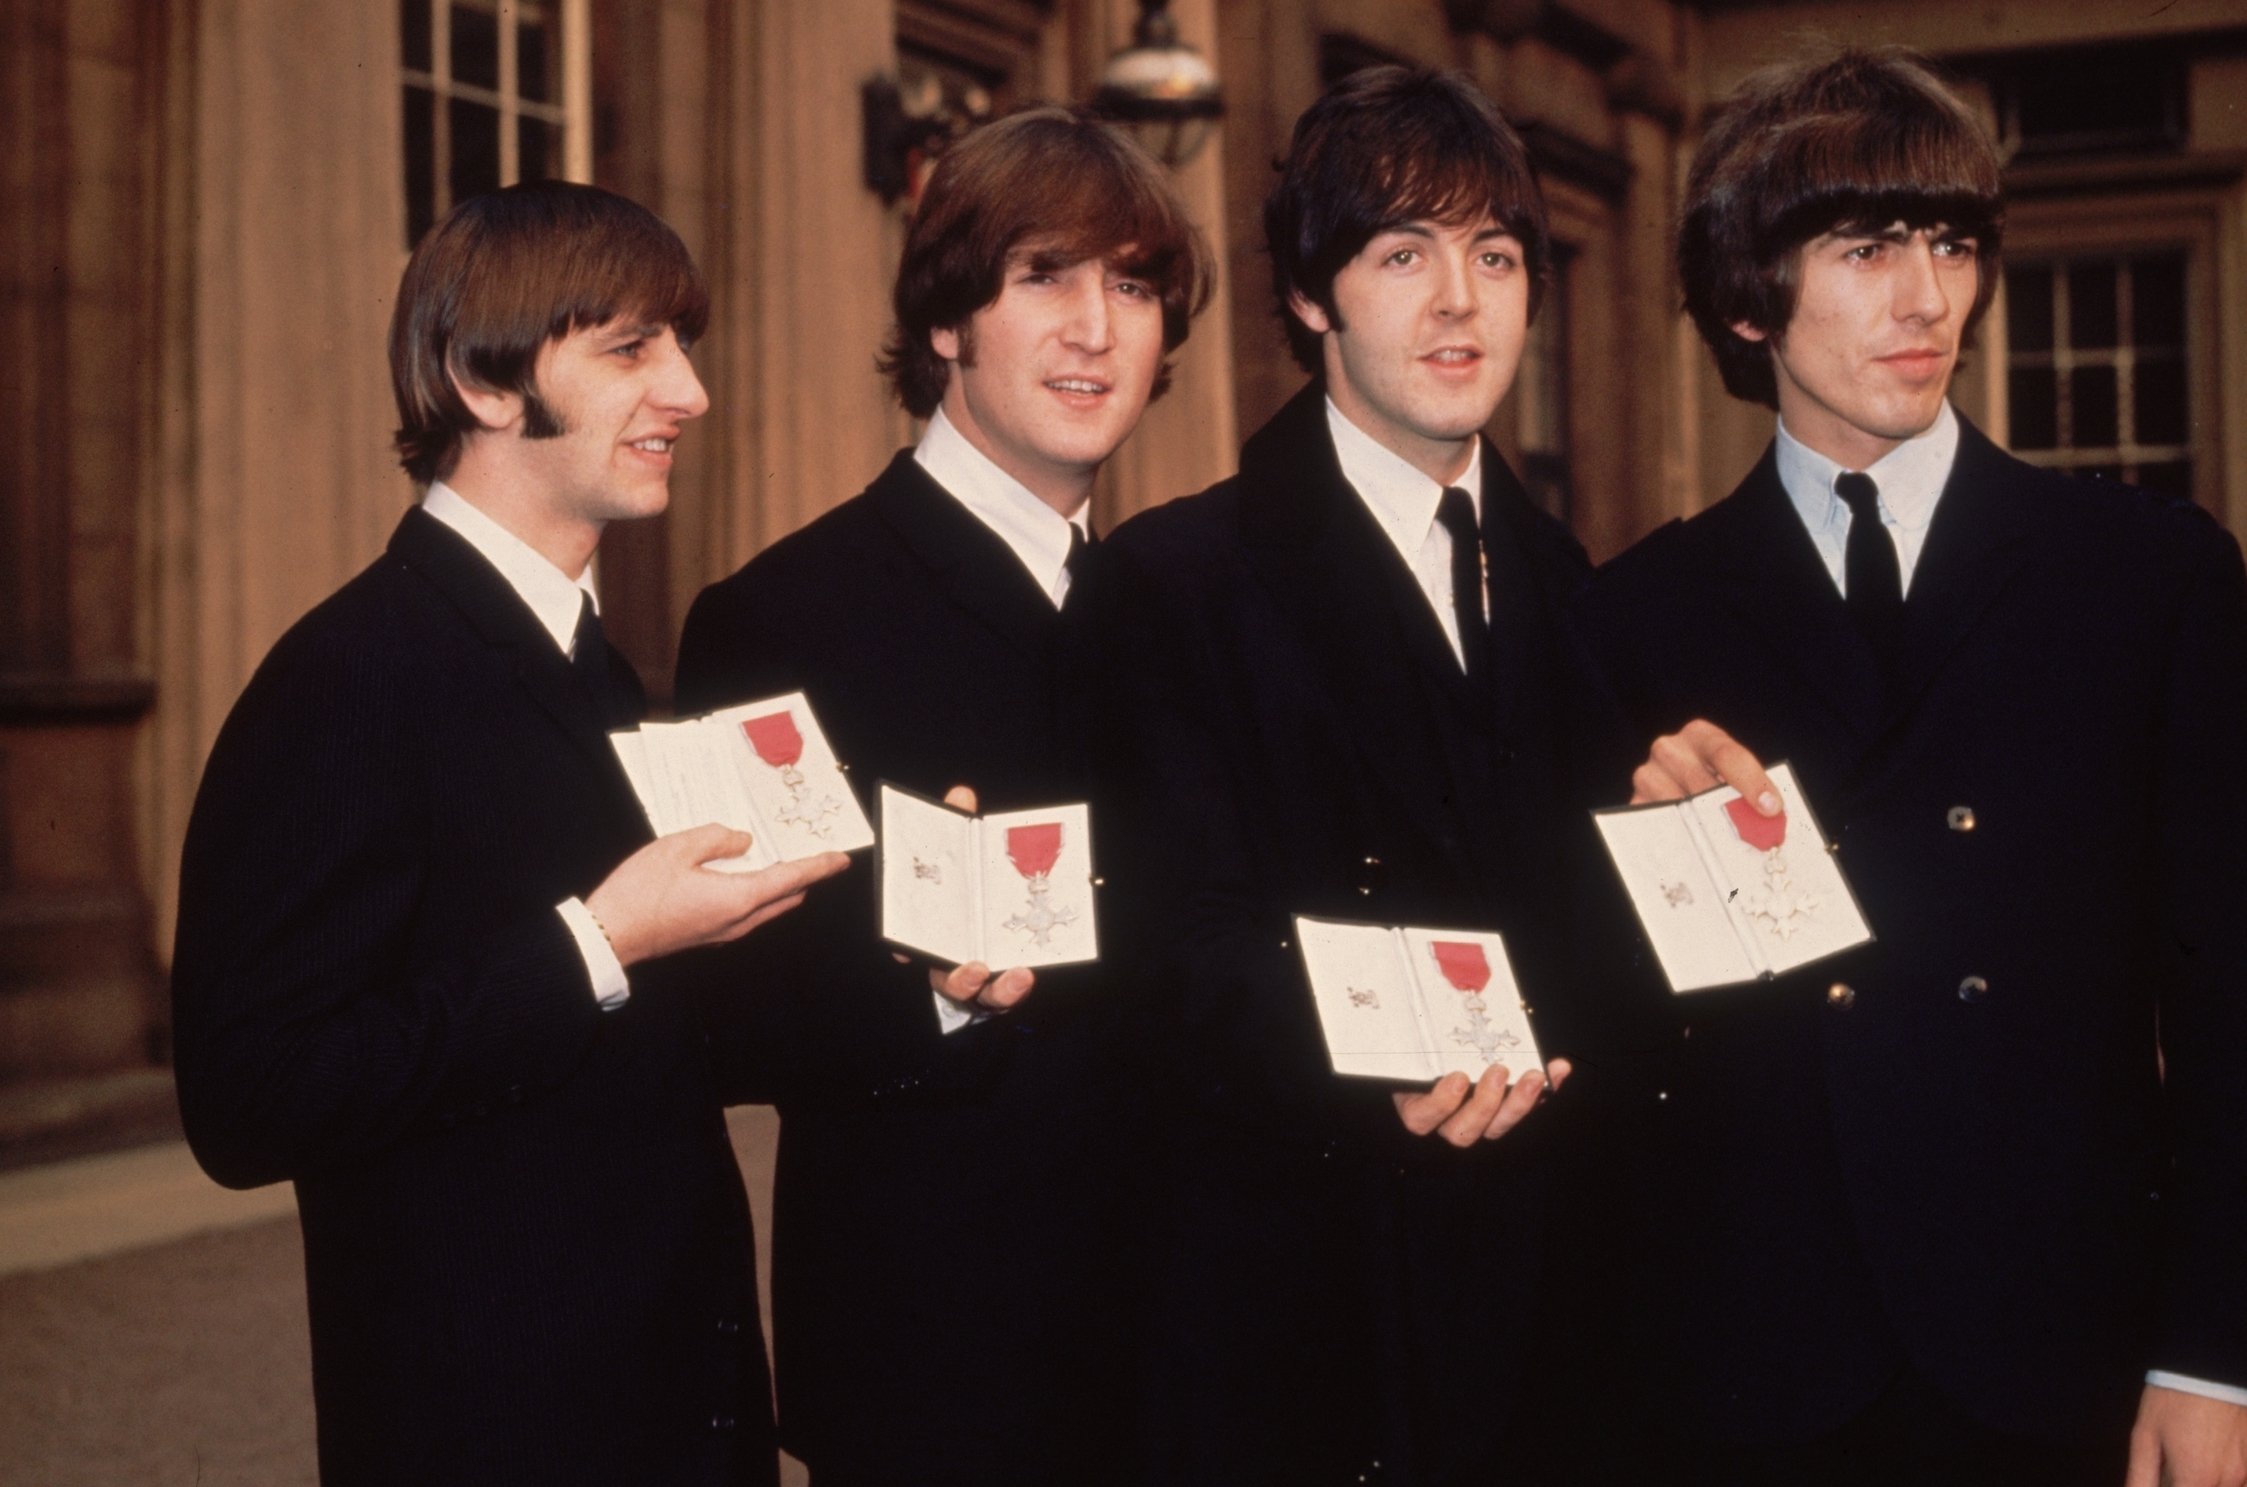 The Beatles are holding their MBE's they received from the Queen